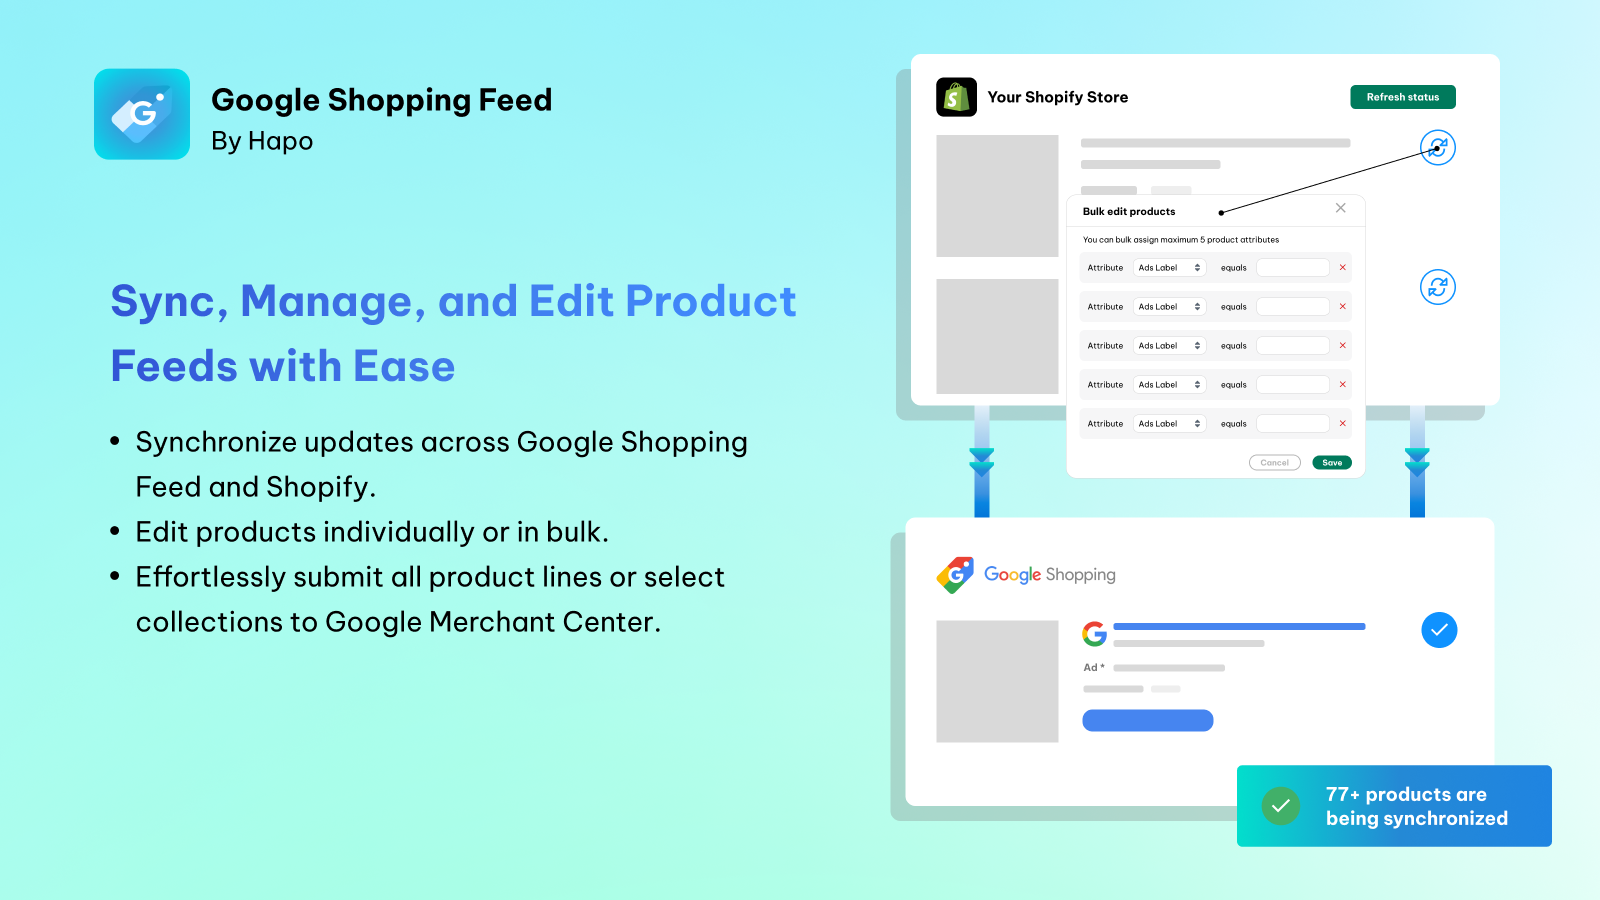 Sync, Manage, and Edit Product Feeds with Ease.